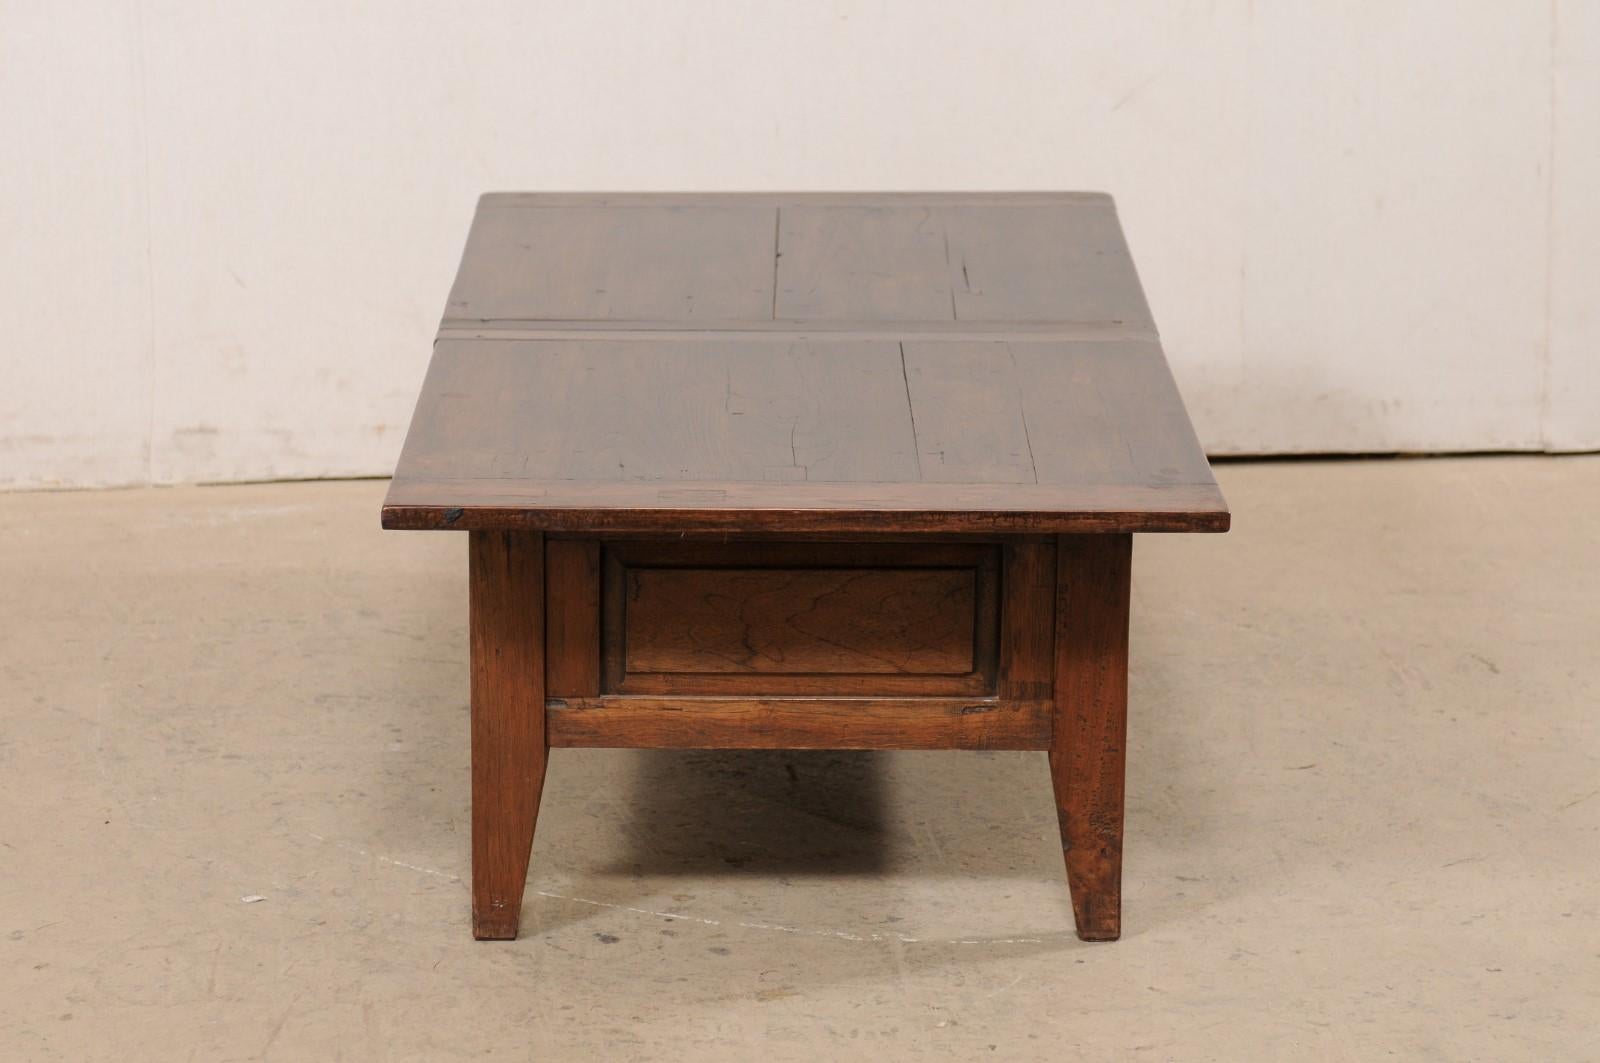 French Fruitwood Coffee Table in Rectangular-Shape w/Storage, Early 20th Century For Sale 4